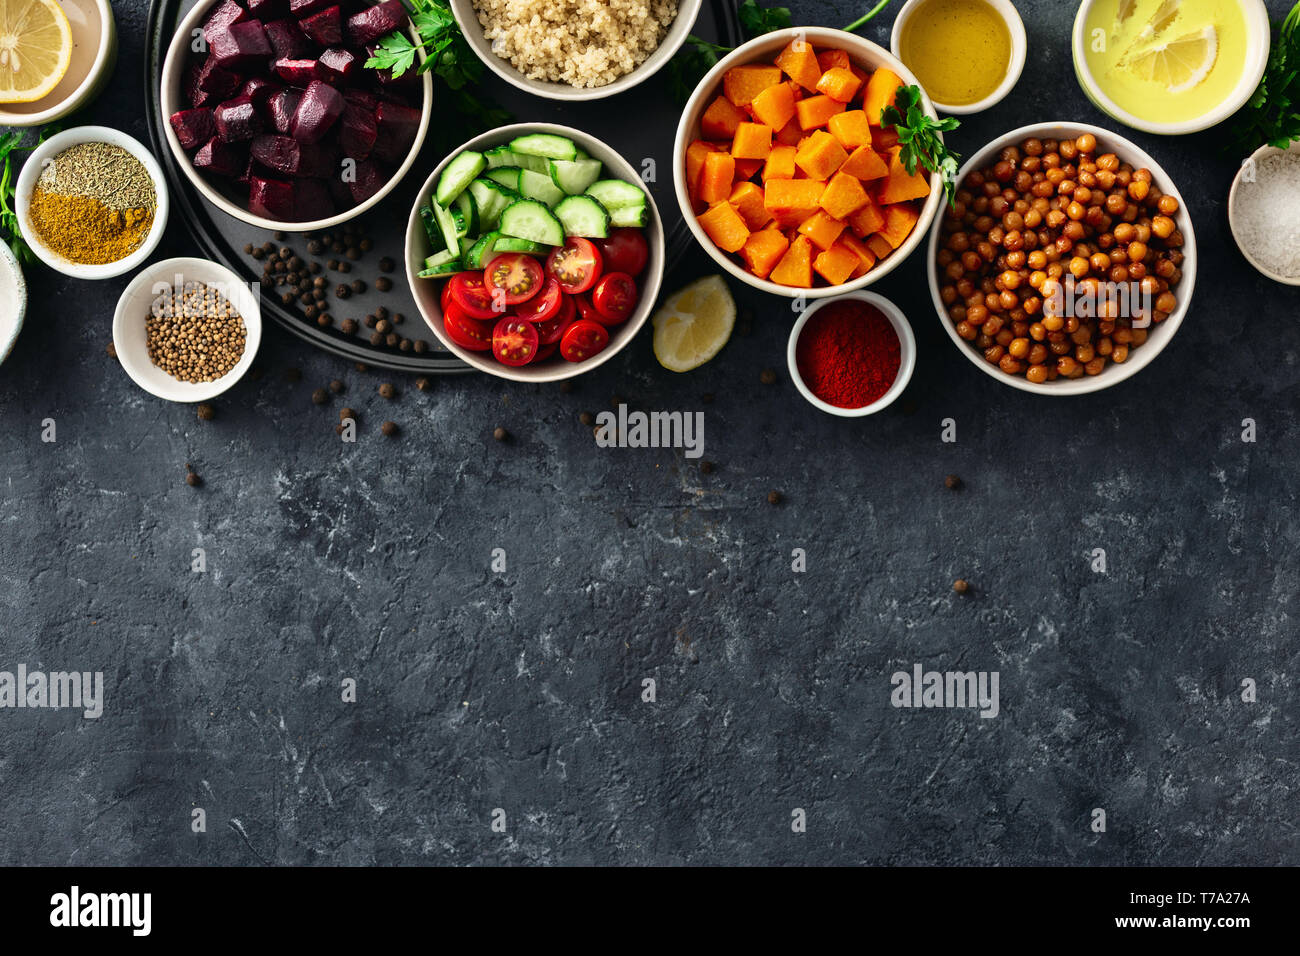 Set food for cooking healthy vegetarian food. Spiced chickpeas, baked pumpkin and beets, quinoa and vegetables on dark stone background with copy spac Stock Photo